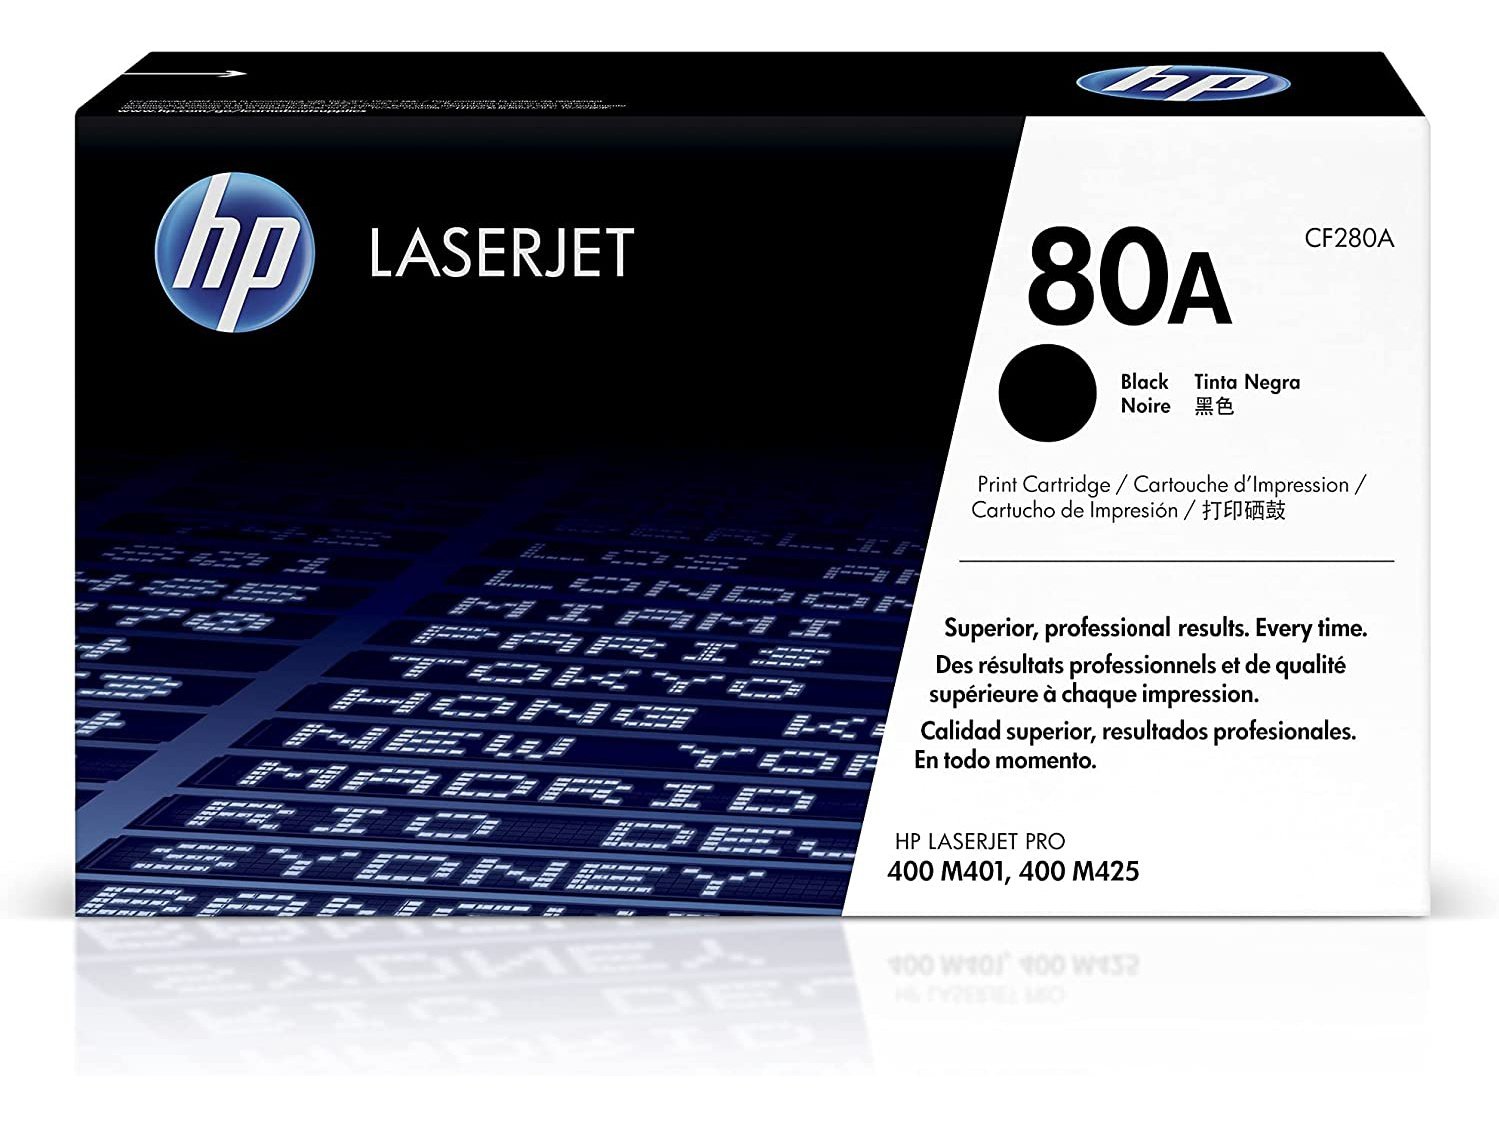 ICU Compatible/ OEM Get HP ICUCF280A Yields 2,700 Pages 80A Black Laser Toner Cartridge - Ink Cartridges USA